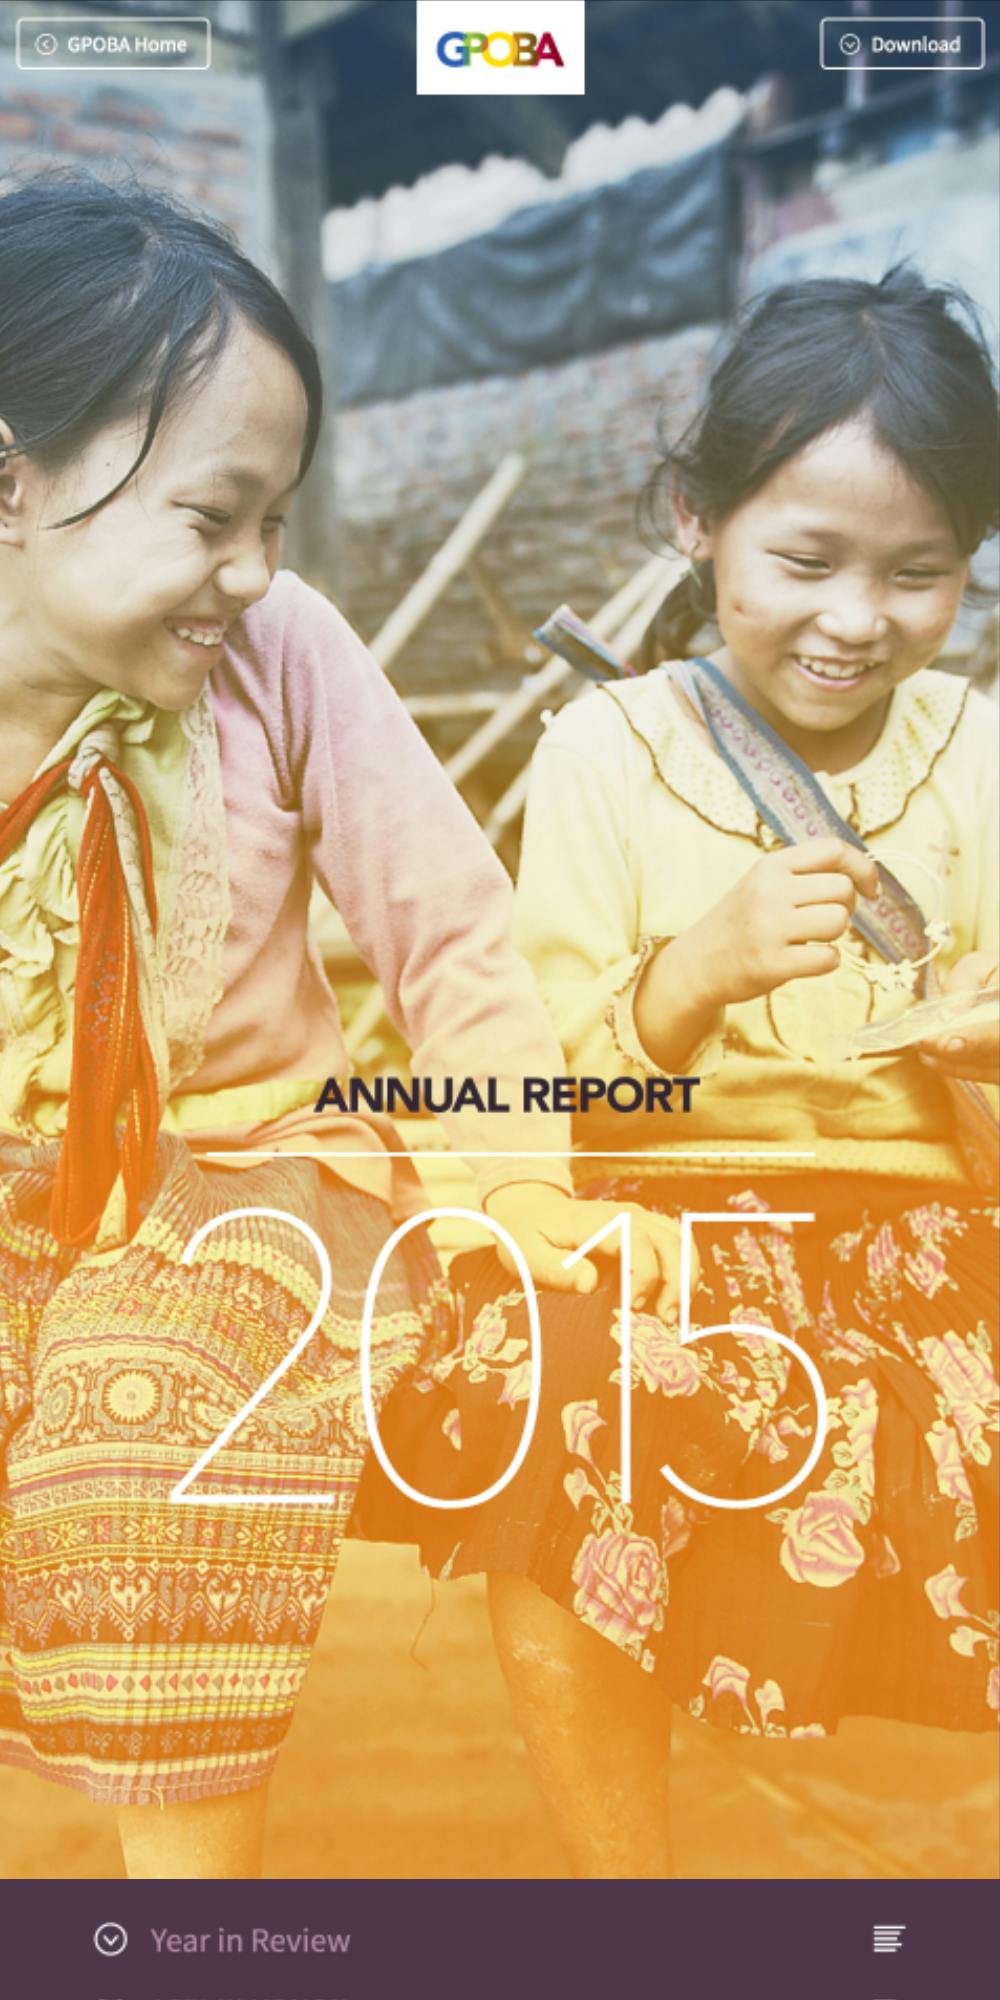 The cover of the digital version of GPOBA’s annual report.